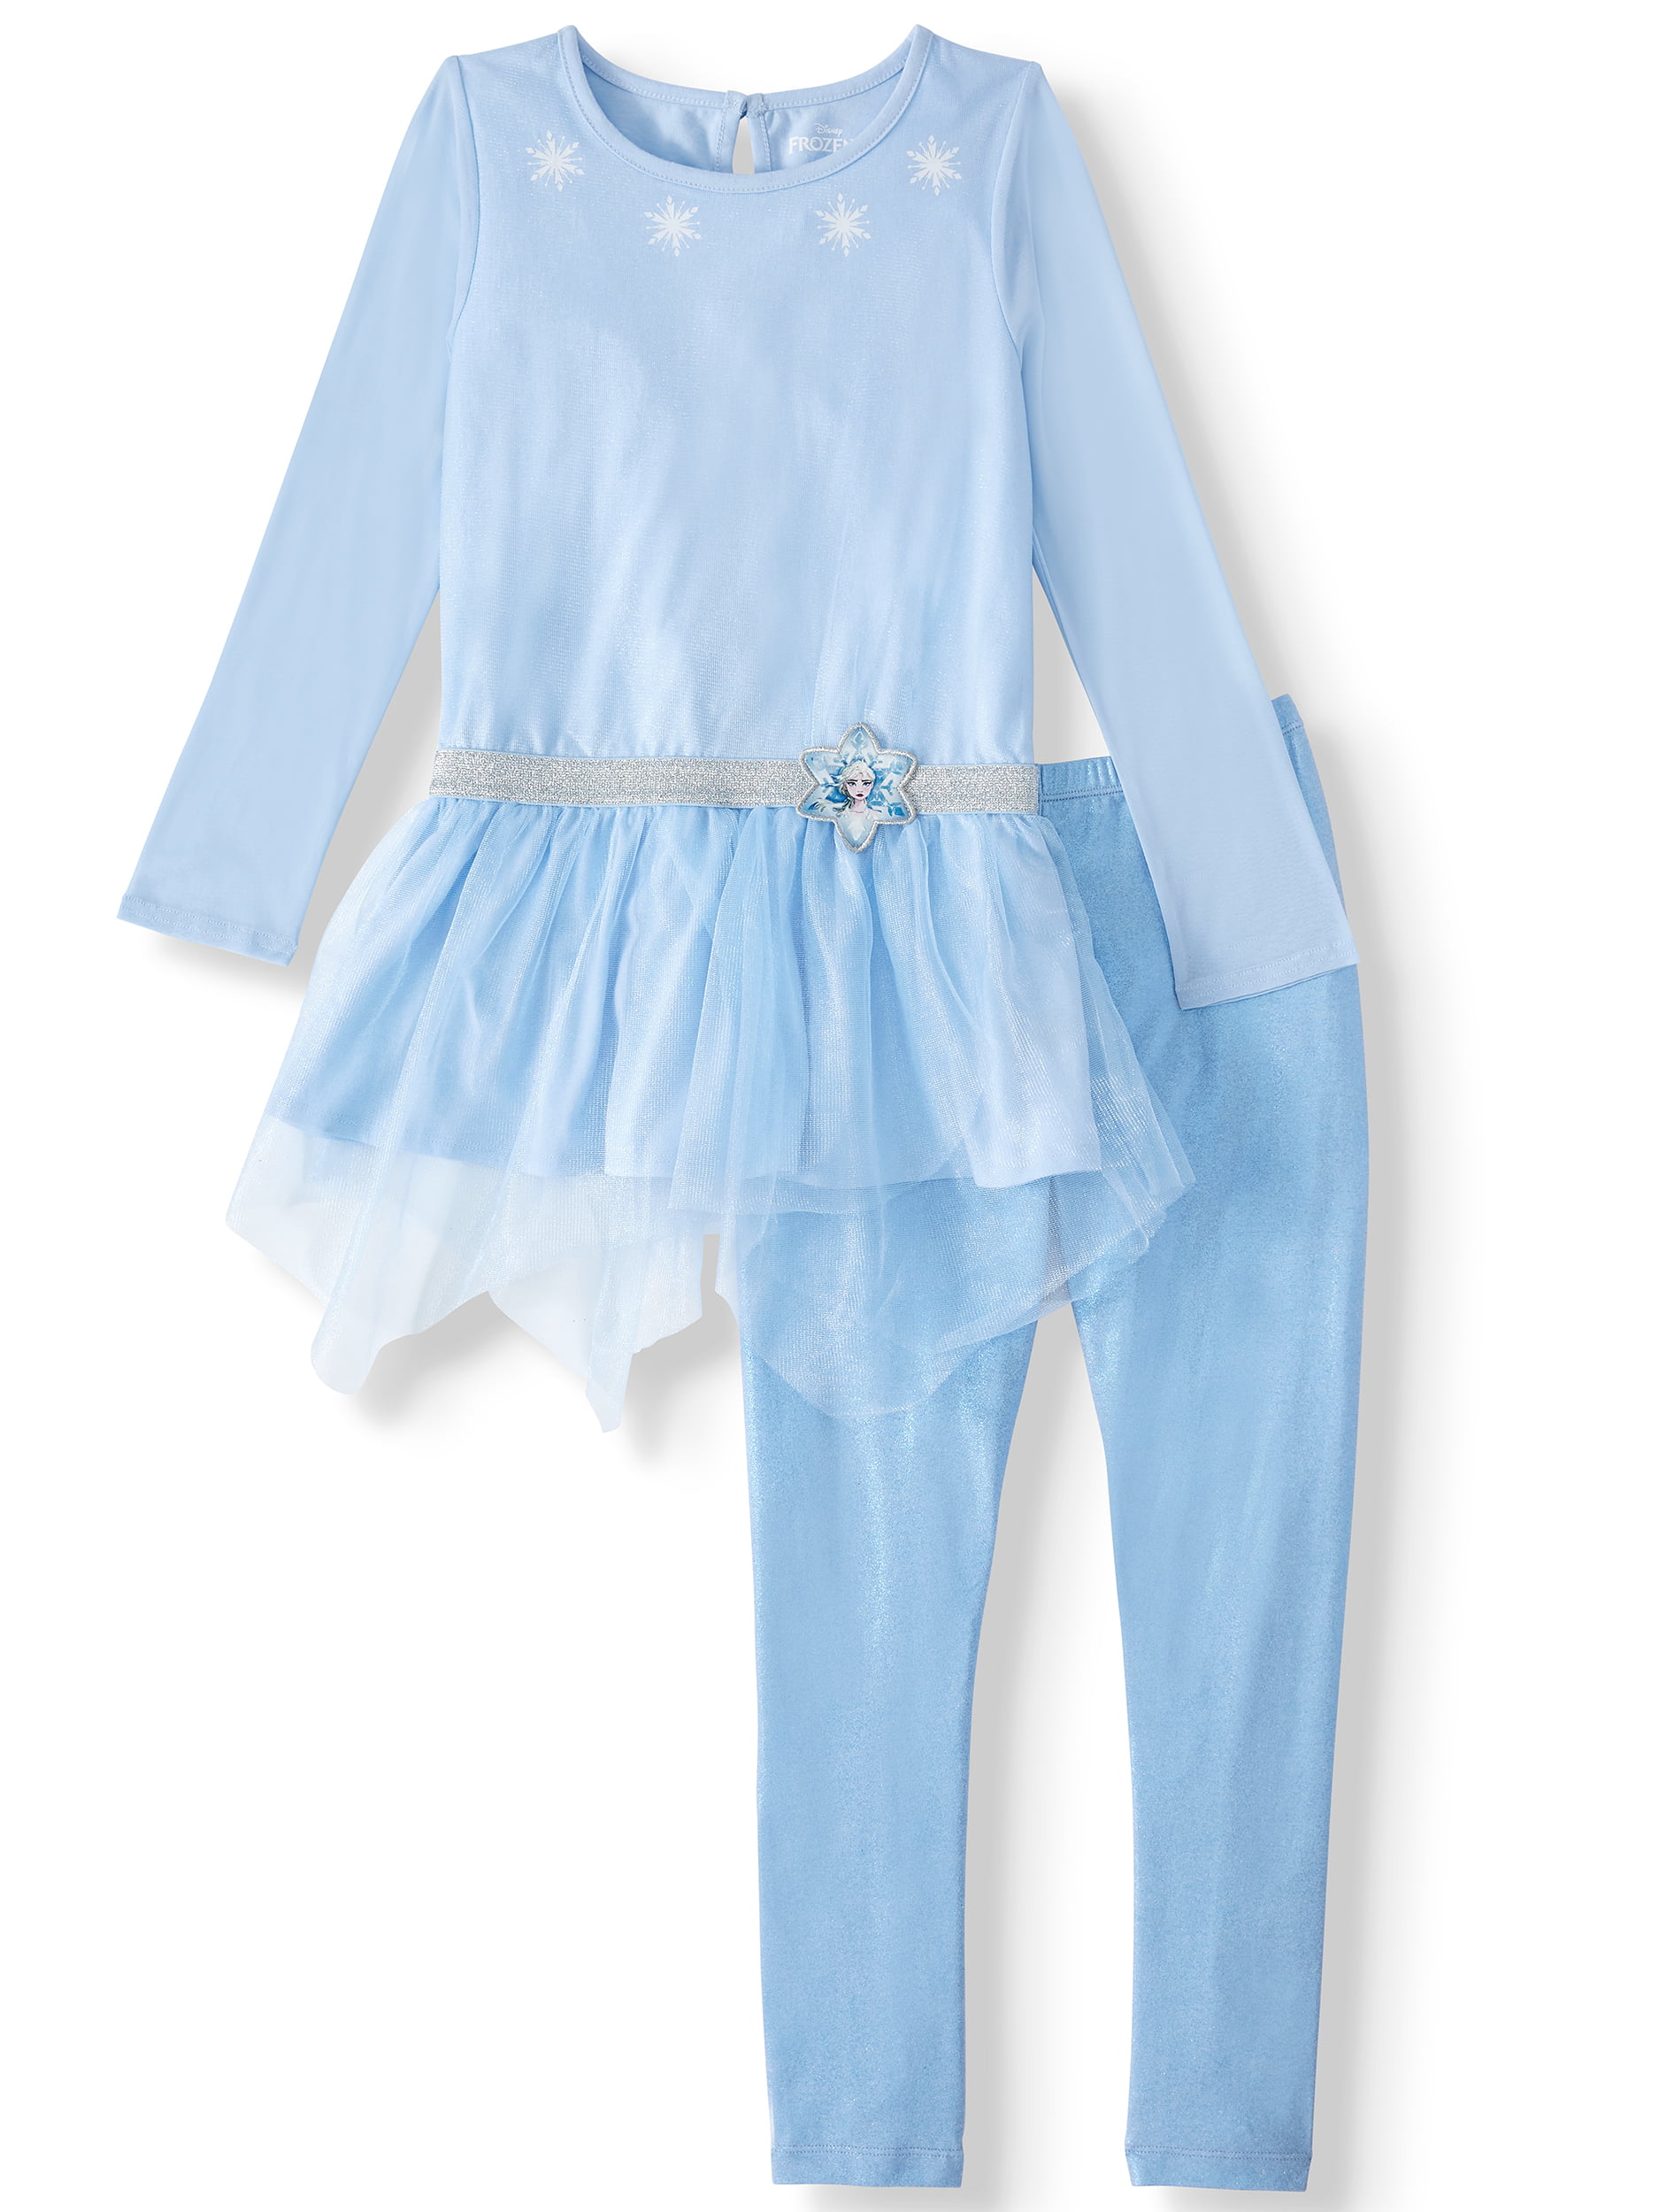 Girl's FROZEN 2 ~ELSA~2 Piece Outfit Baby Blue Sparkly NWT 